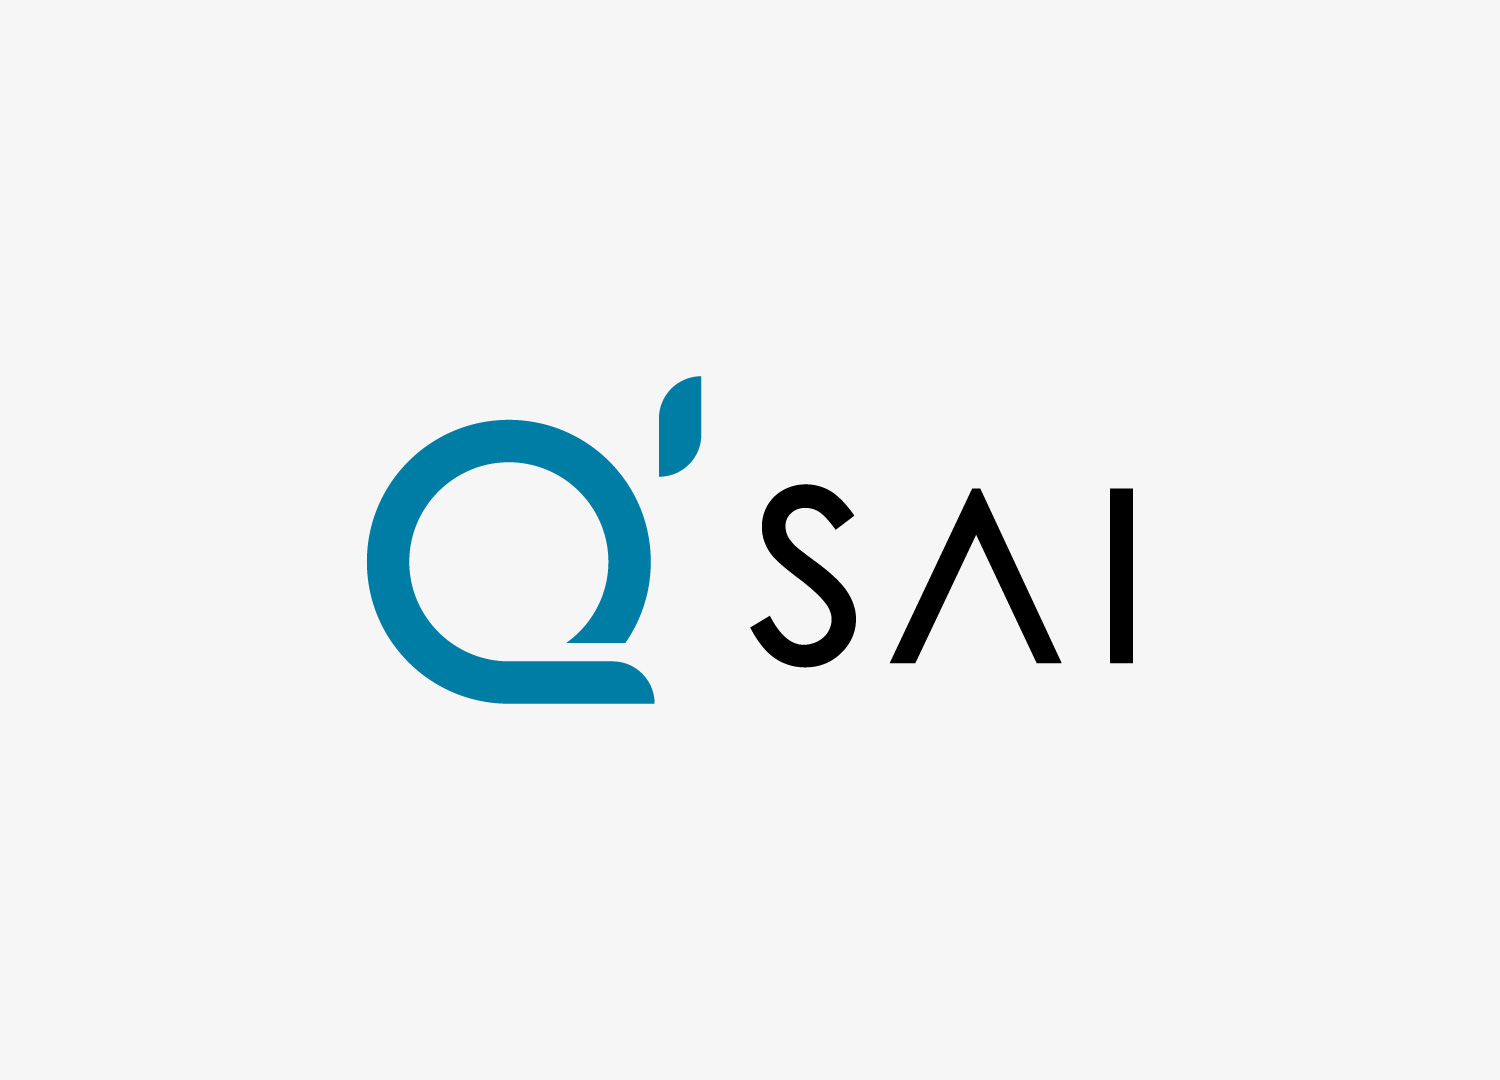 qsai analysis and research center co. ltd